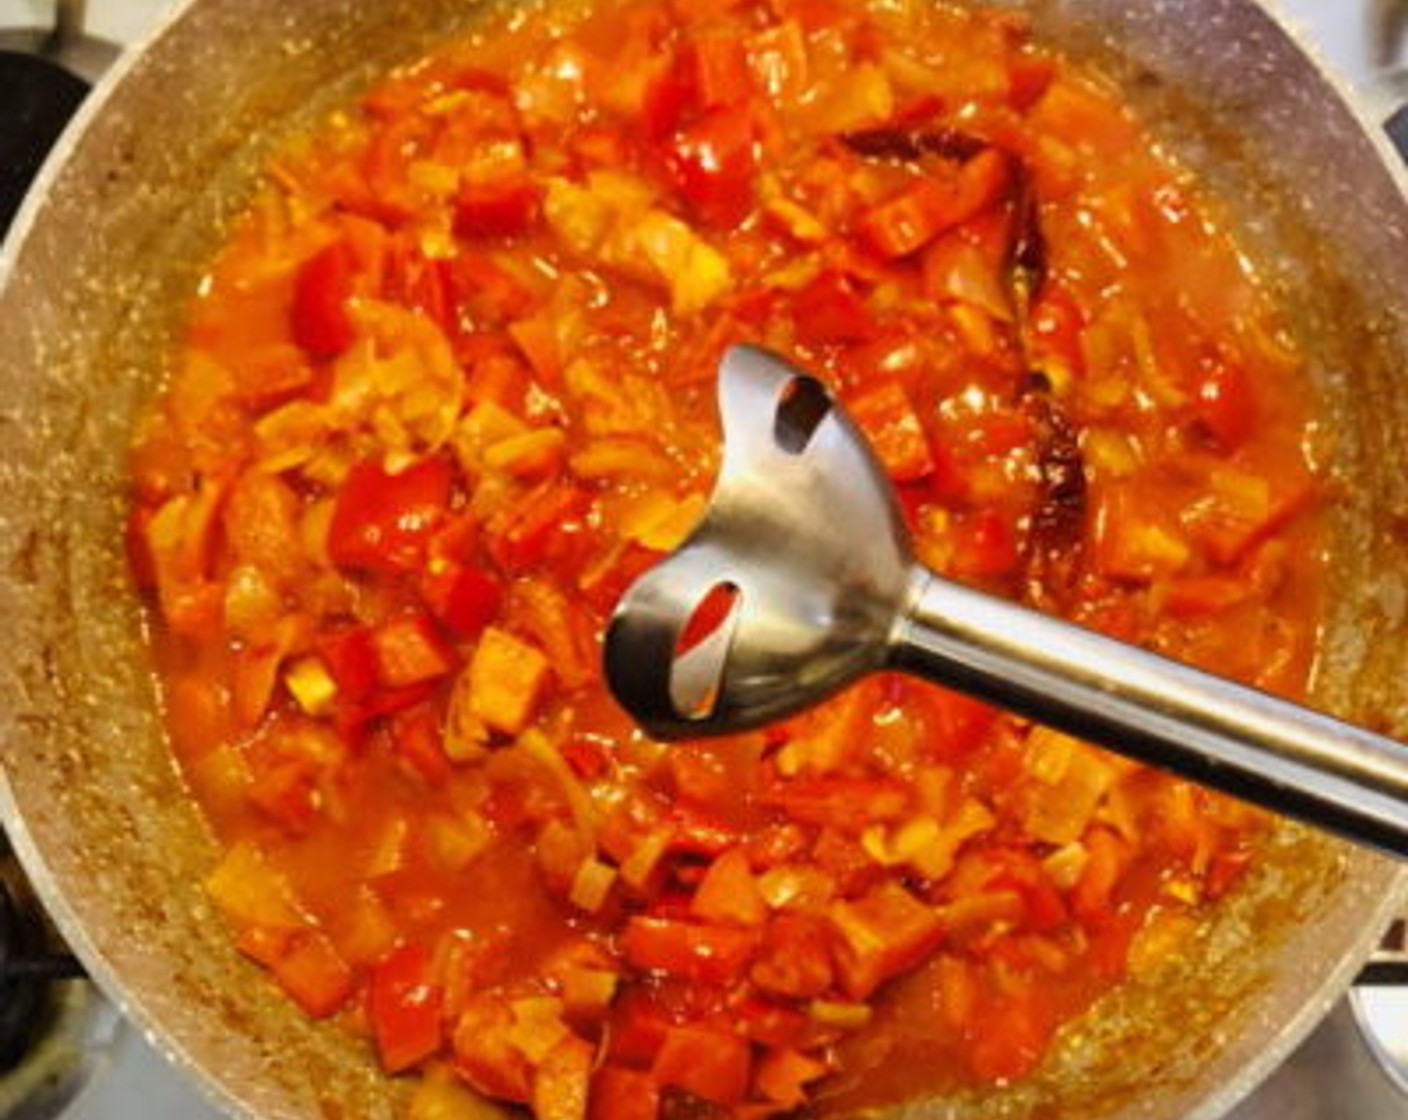 step 4 Add one-quarter of the Chicken Stock (1/2 cup) and allow the red bell pepper and tomatoes to simmer and break down for about 10-15 minutes until tender. Turn off the heat and either using a stick blender or transferring contents to a stand blender to puree until completely smooth.